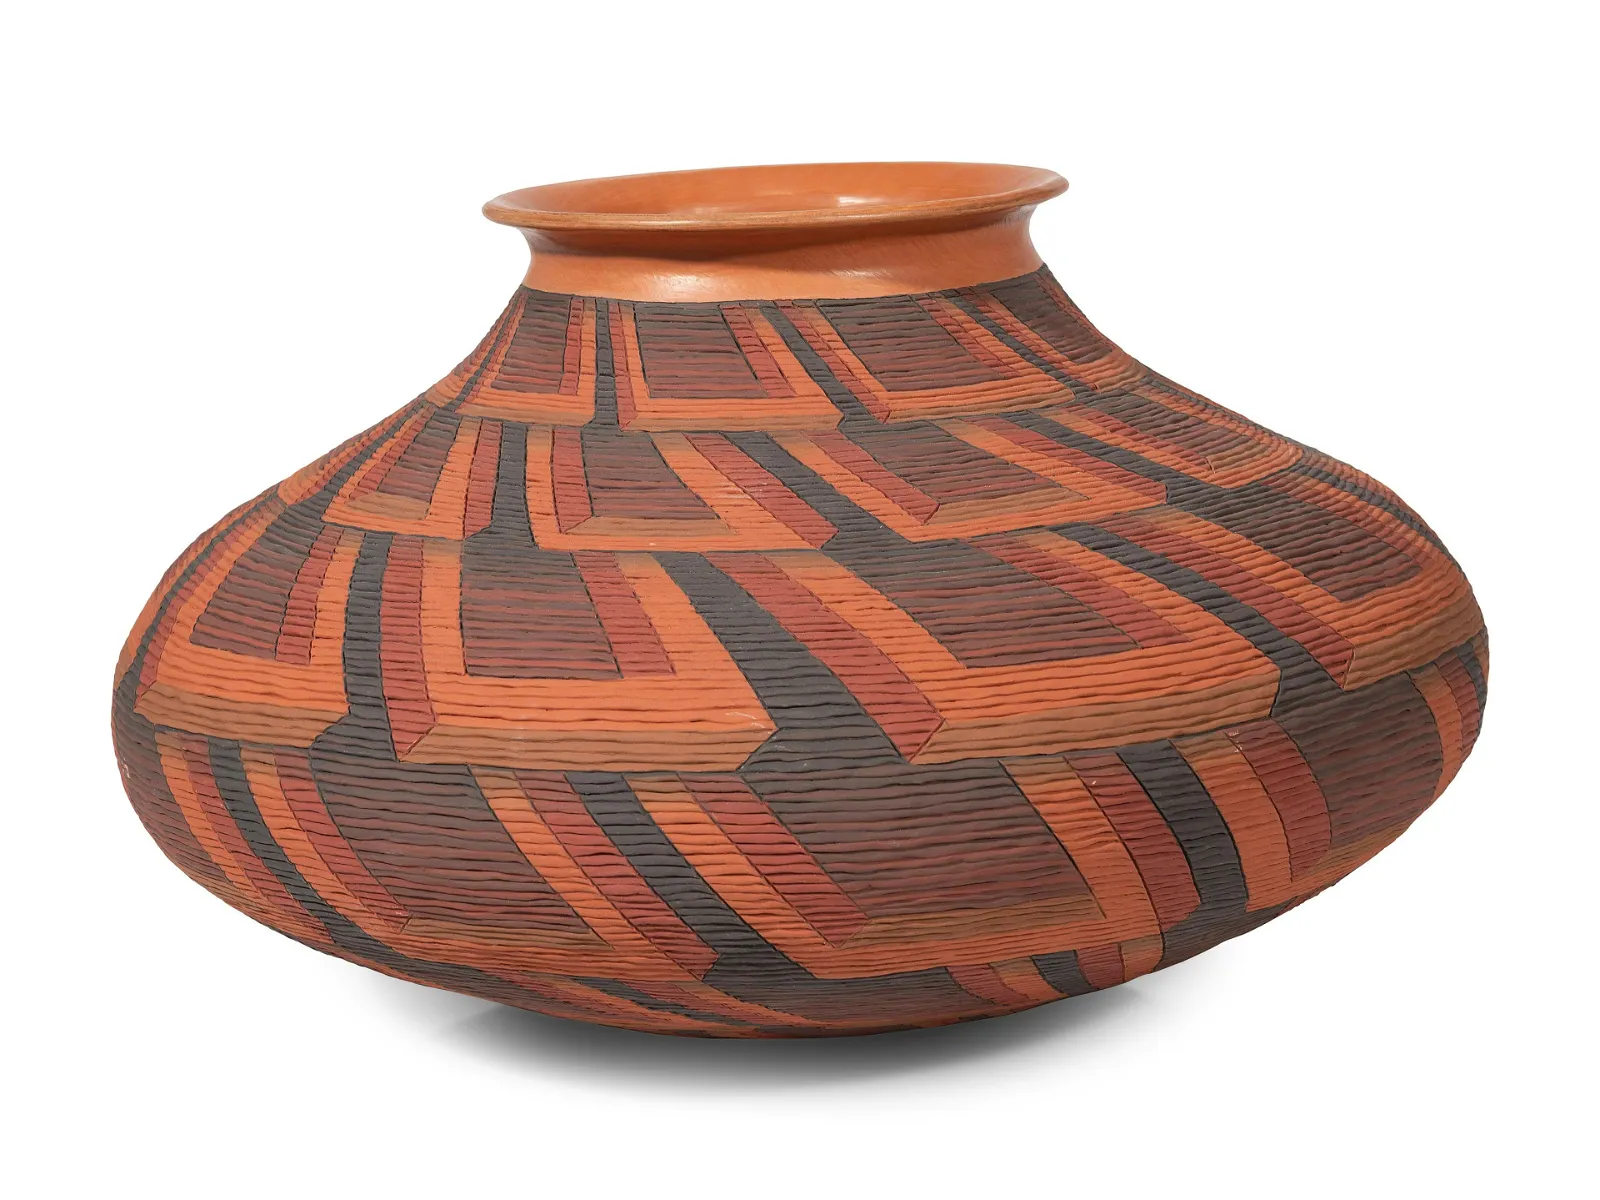 A 2004 Richard Zane Smith piece simply titled Corrugated Polychrome Pottery Jar earned $3,500 plus the buyer’s premium in May 2022. Image courtesy of Hindman and LiveAuctioneers.